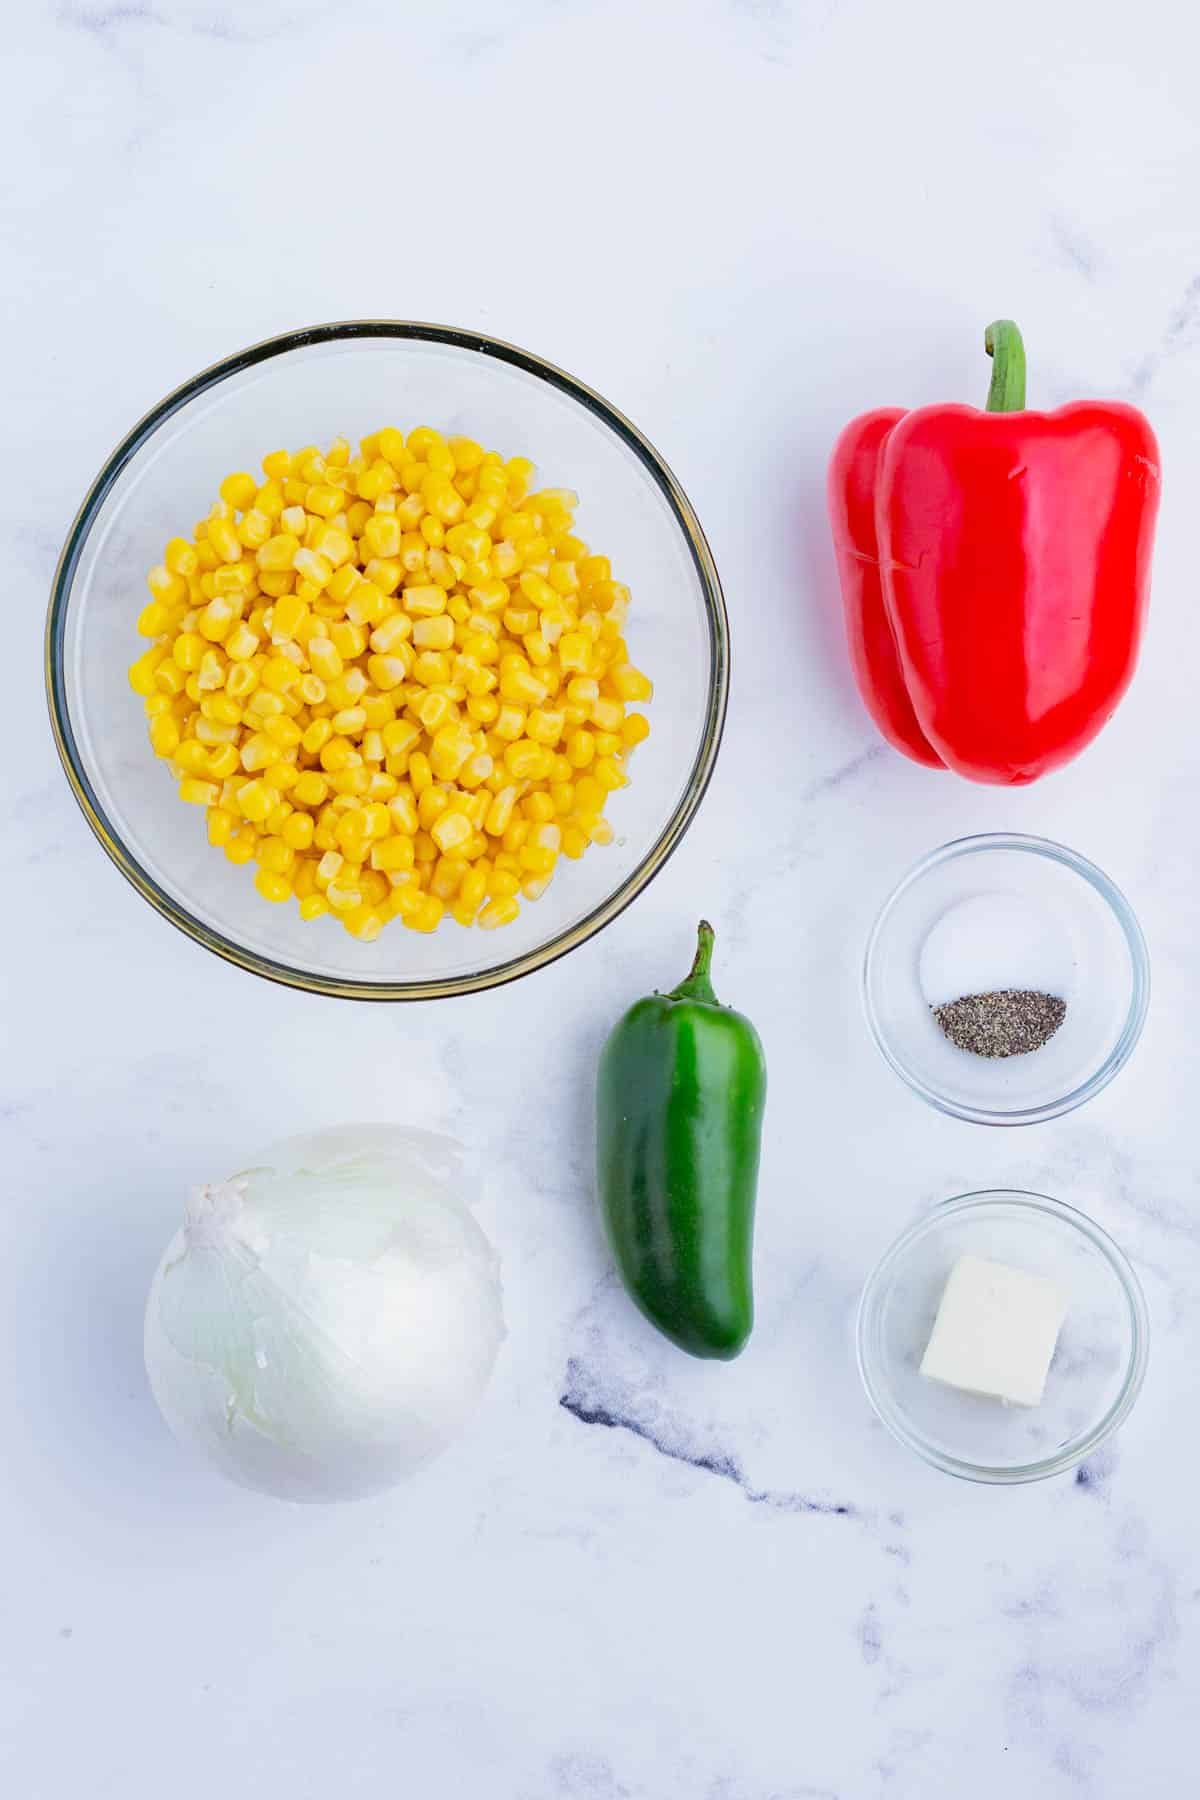 The corn succotash ingredients include corn, peppers, onion, and seasoning.